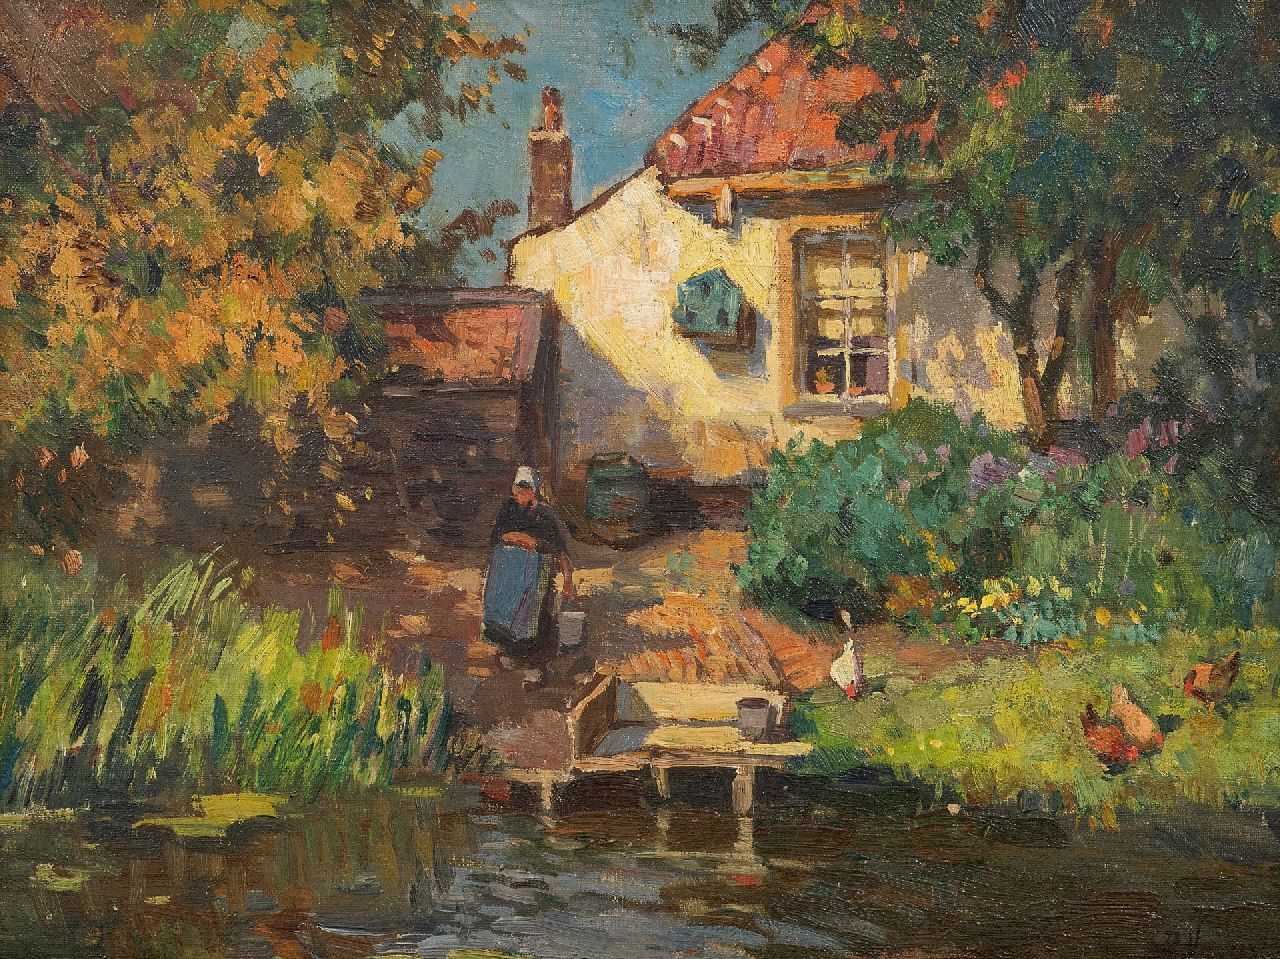 Viegers B.P.  | Bernardus Petrus 'Ben' Viegers | Paintings offered for sale | Farmhouse at Broeksloot, oil on canvas 30.3 x 40.4 cm, signed l.r.